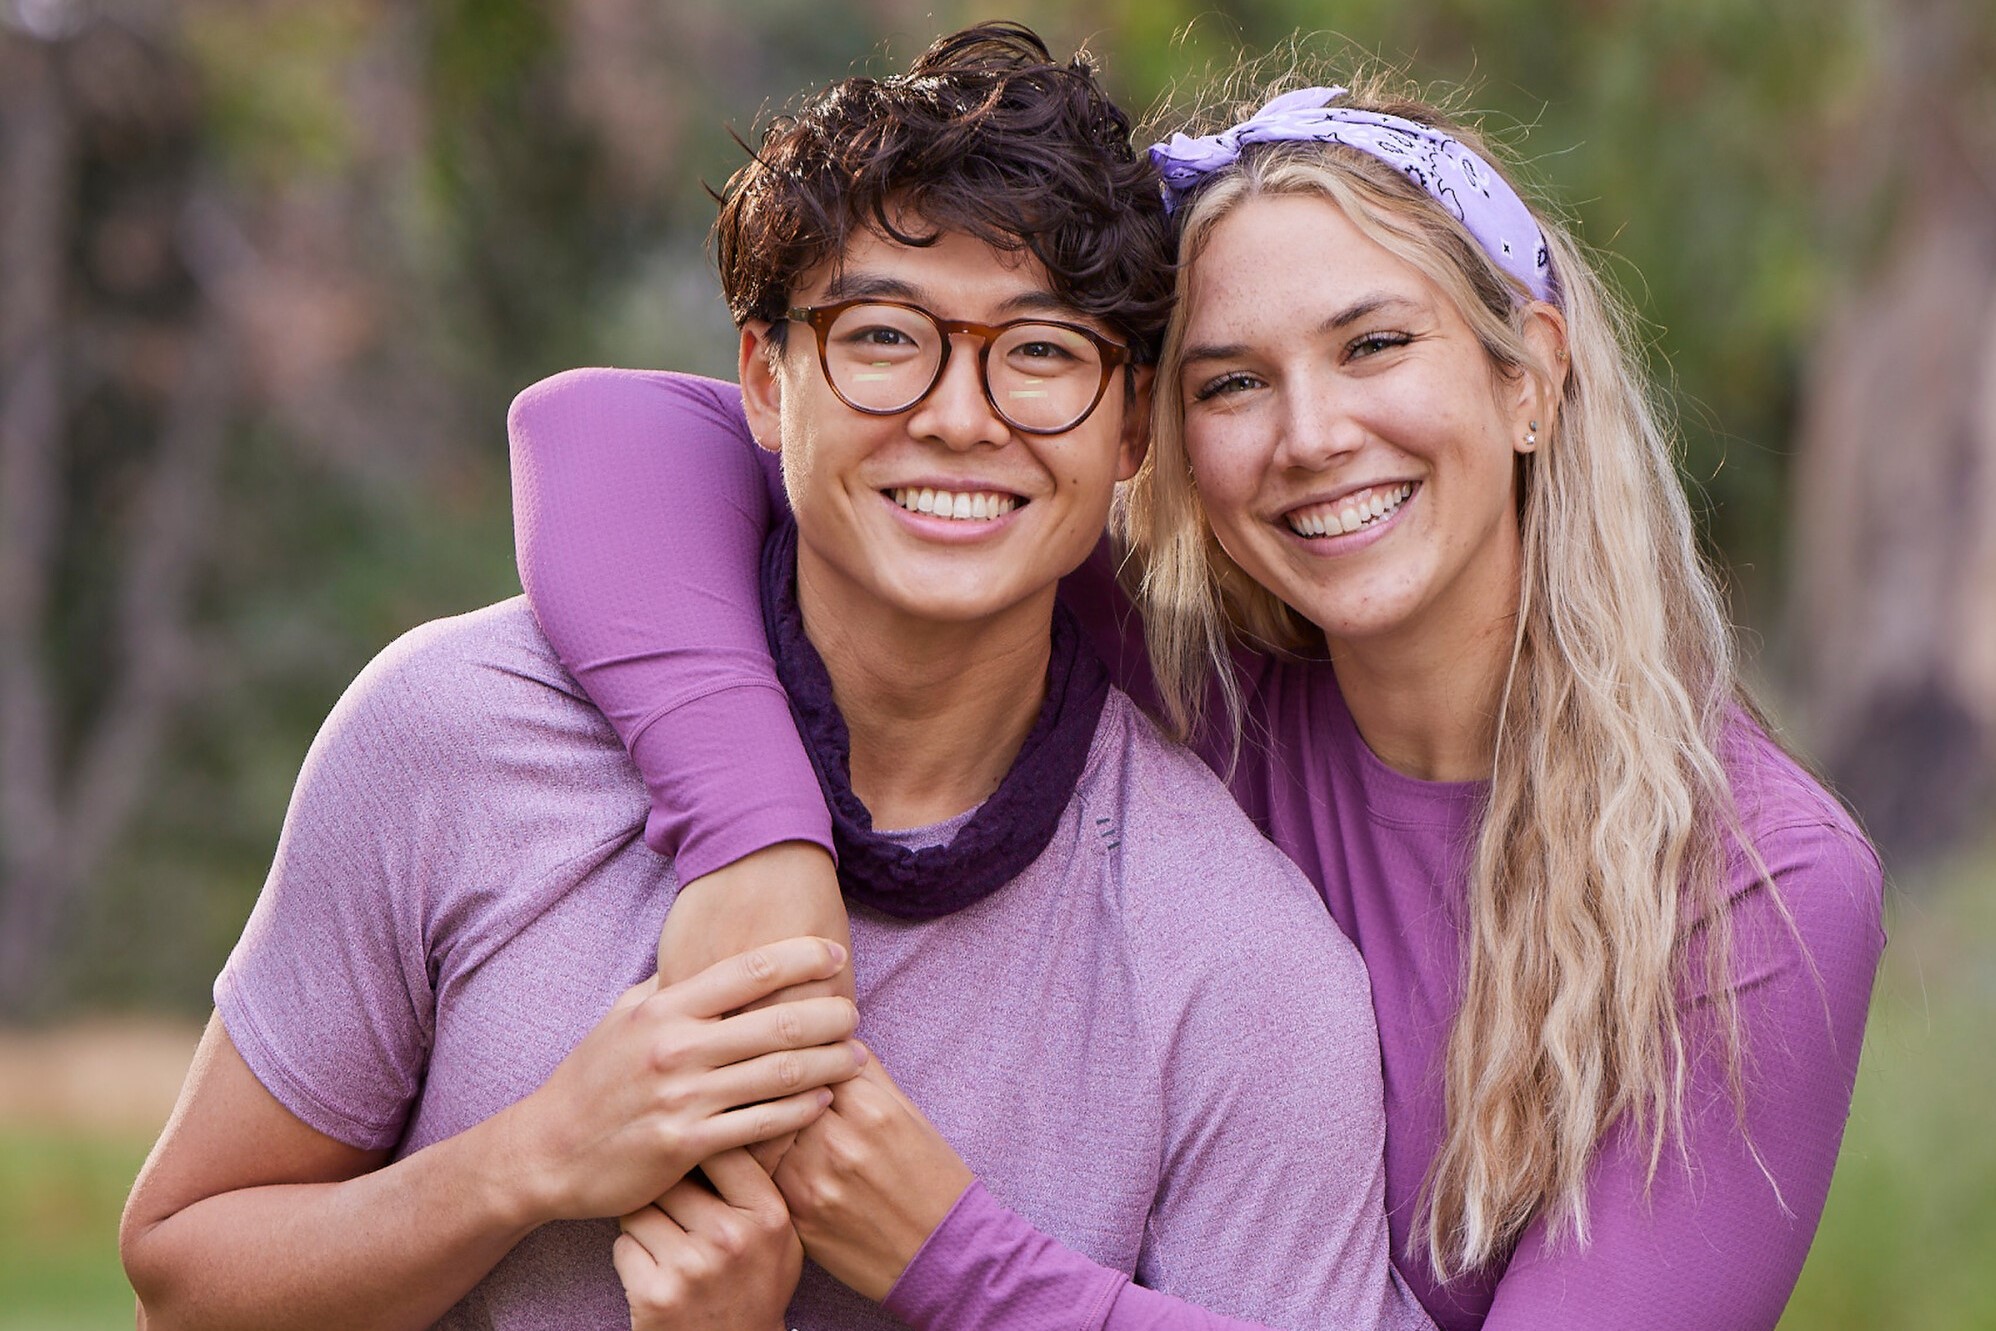 Derek Xiao and Claire Rehfuss, who star in 'The Amazing Race' Season 34 on CBS, pose for promotional pictures. Derek wears a light purple shirt. Claire wears a purple long-sleeved shirt.